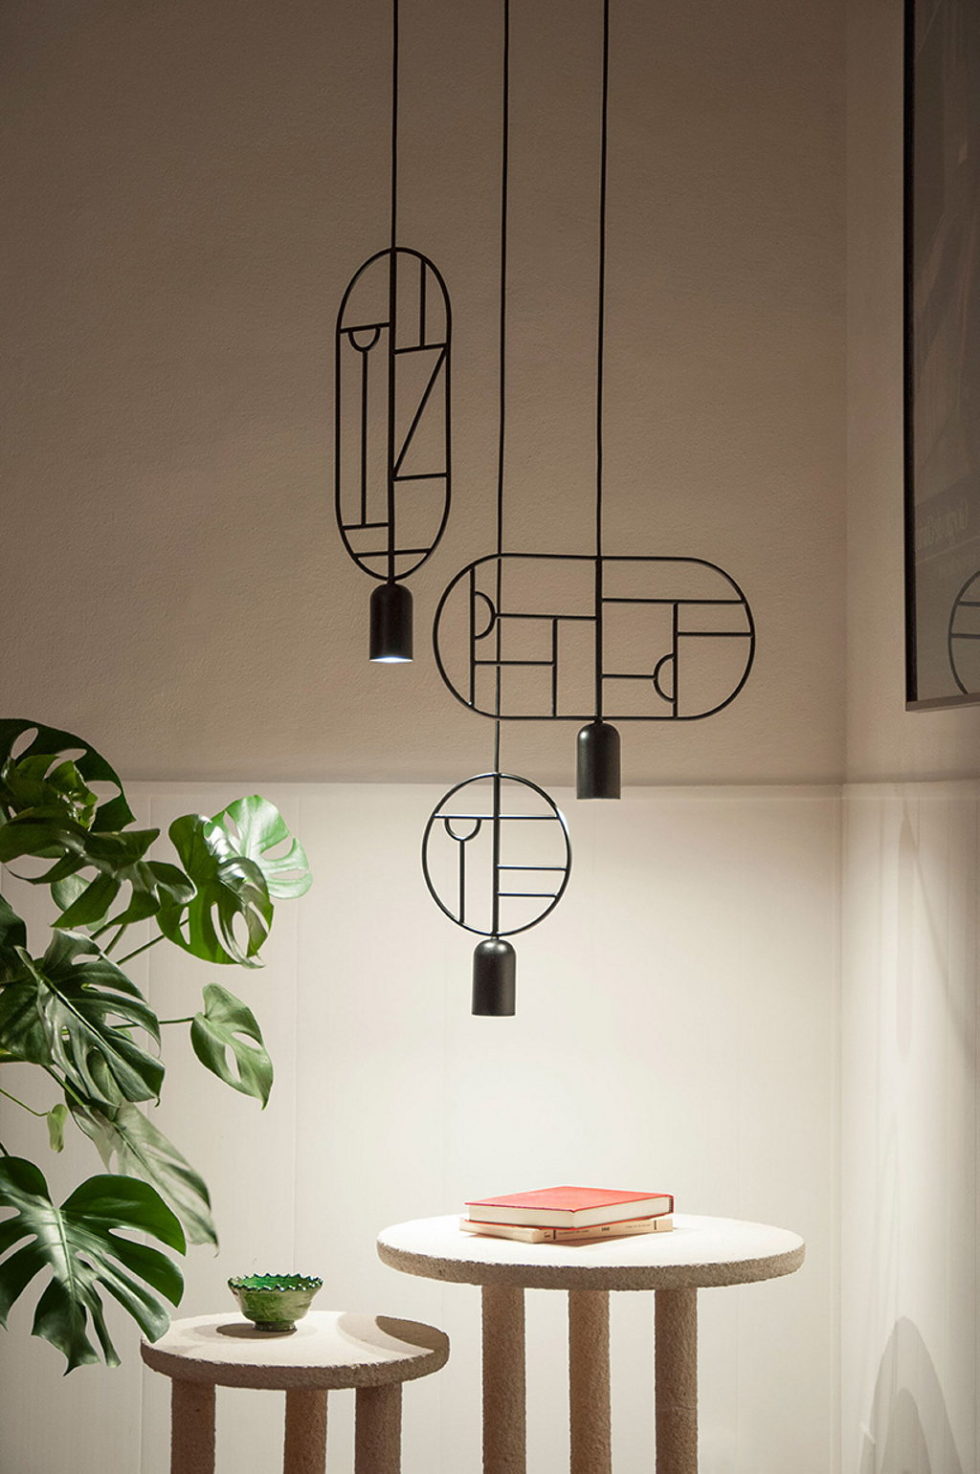 Minimalist pendant lamps Lines & Dots from Goula Figuera studio 8